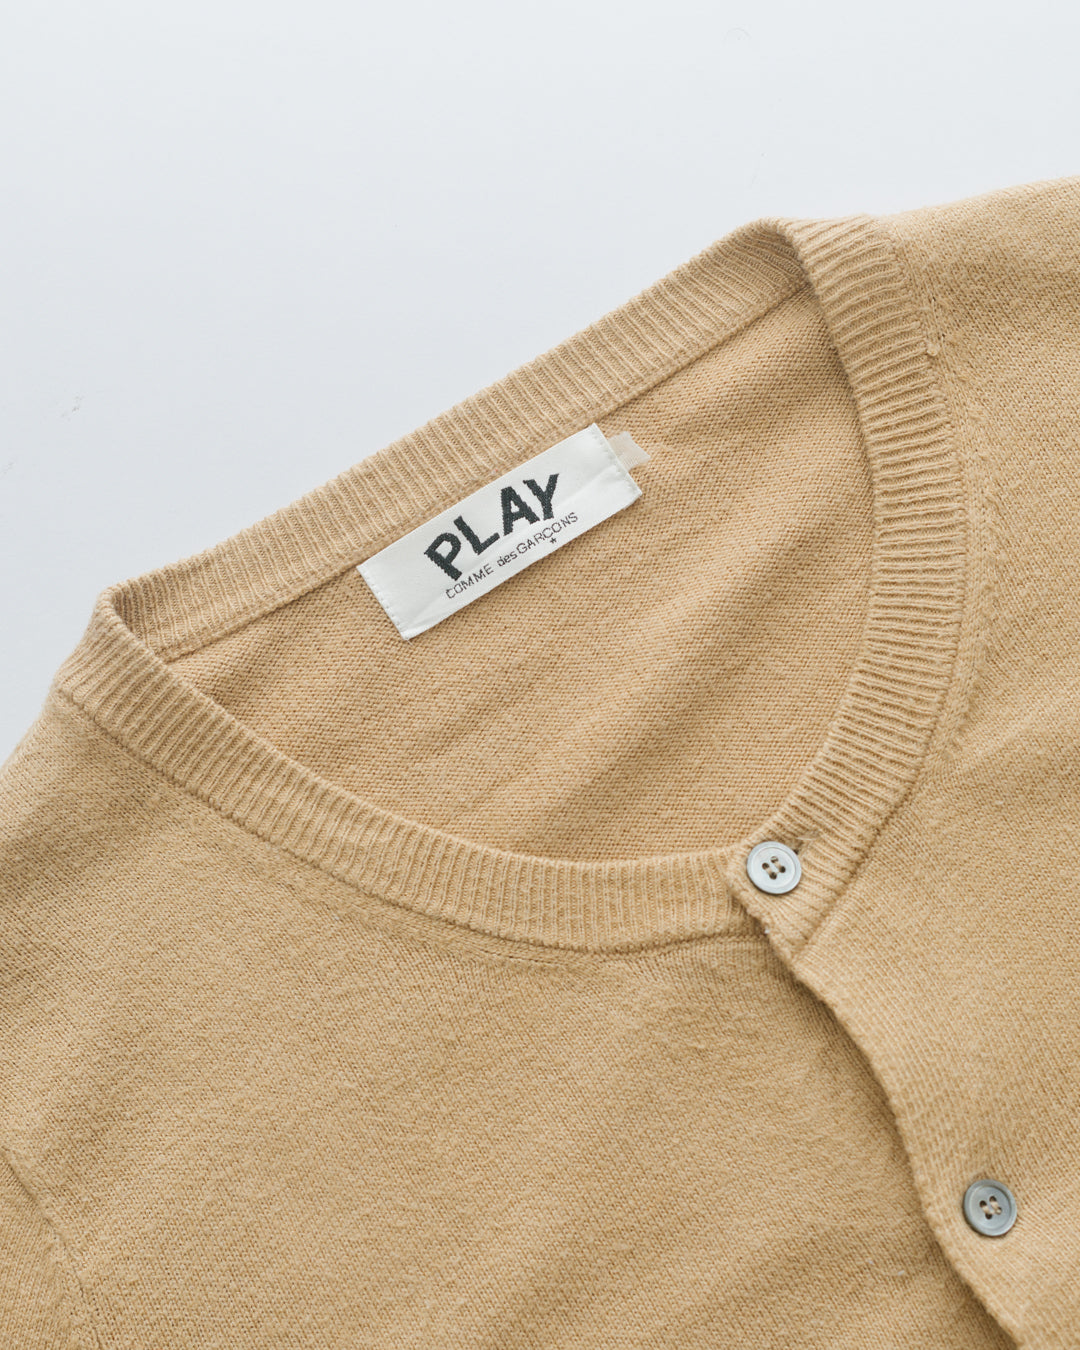 Play by CDG Knit Cardigan